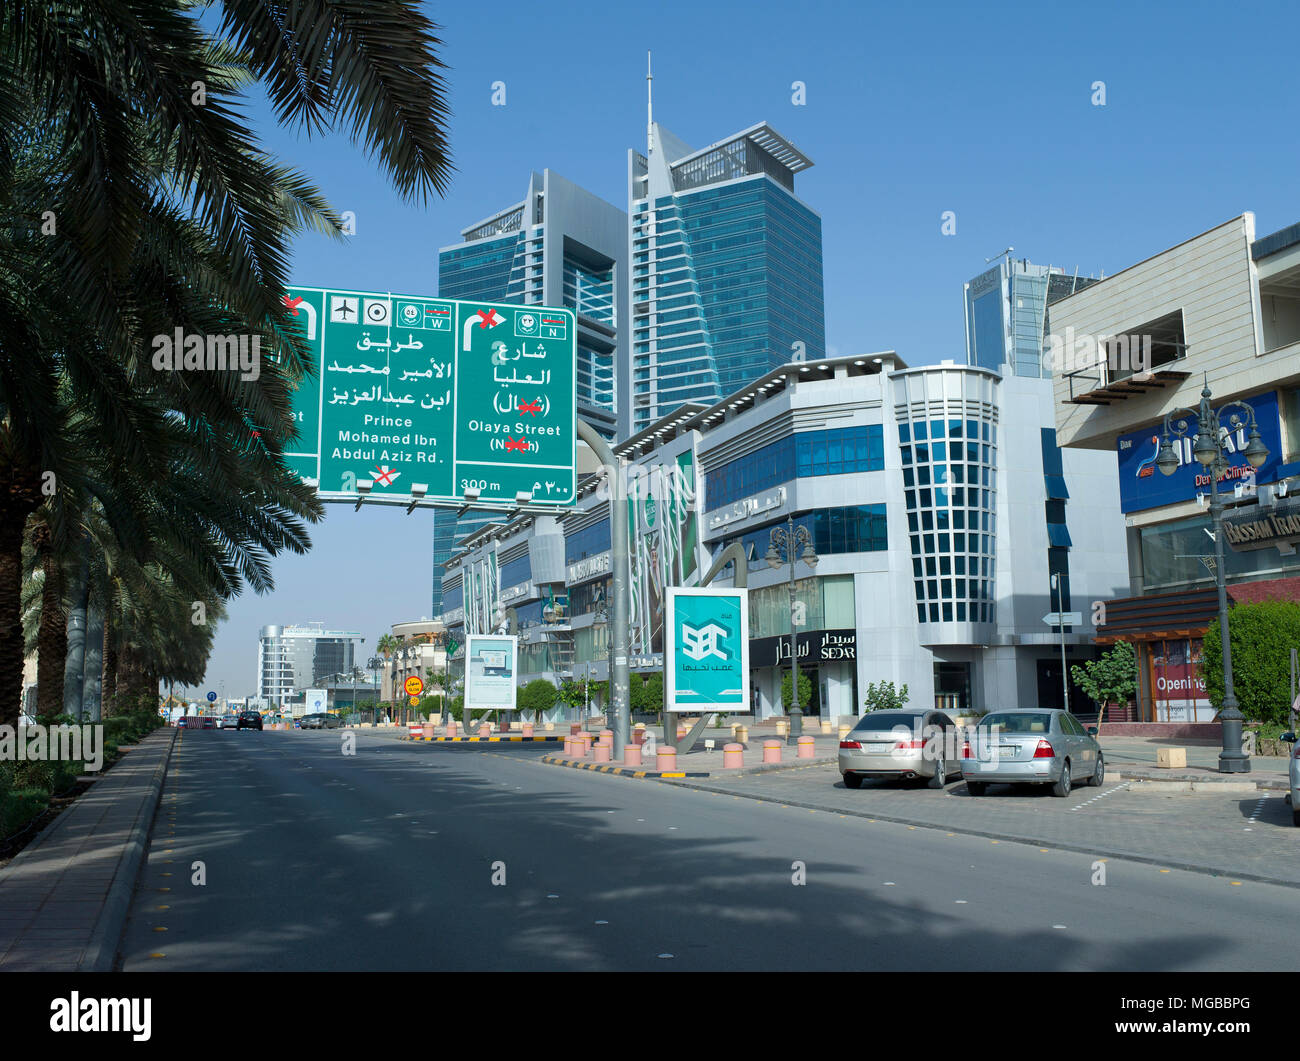 Mandatory Re-routing Sign Caused By Metro Construction on Olaya and Tahlia Street Cross Roads In Riyadh, Saudi Arabia, 26-04-2018 Stock Photo